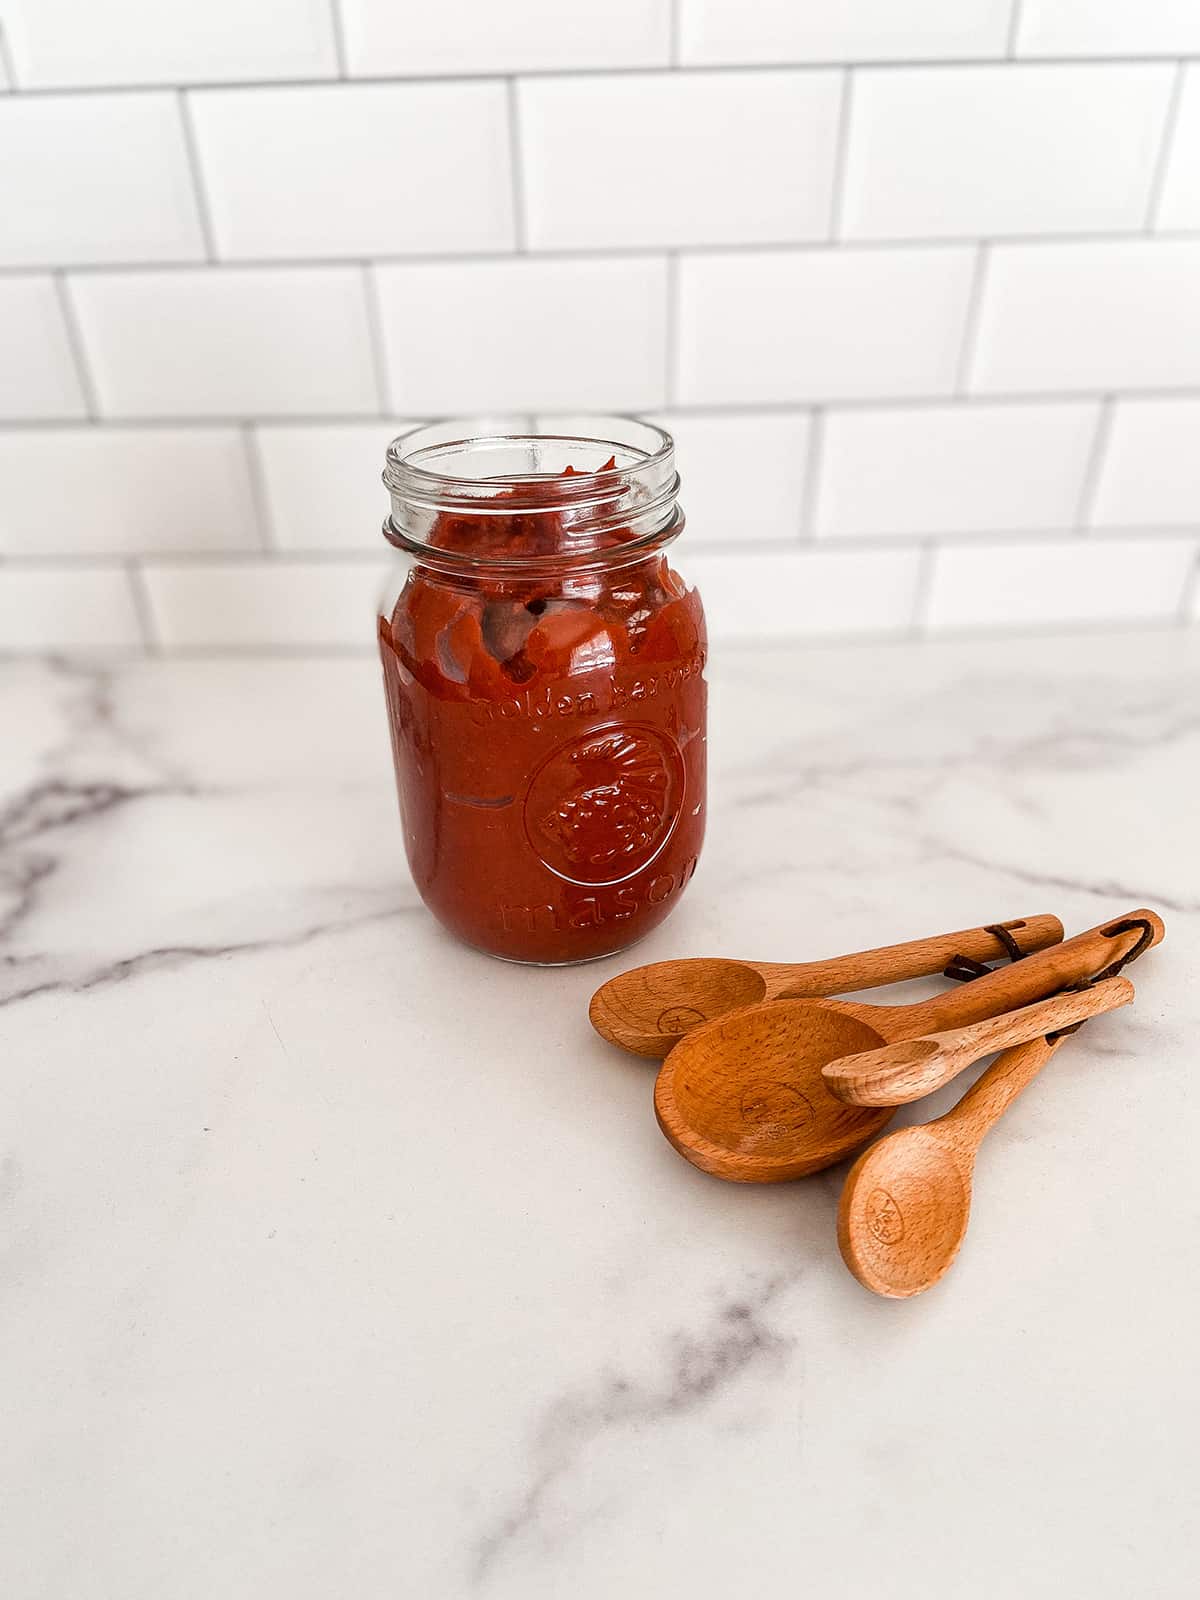 Making your own homemade low-carb, Paleo, Whole30, and GAPS diet-friendly Ketchup at home is much easier than you might think!